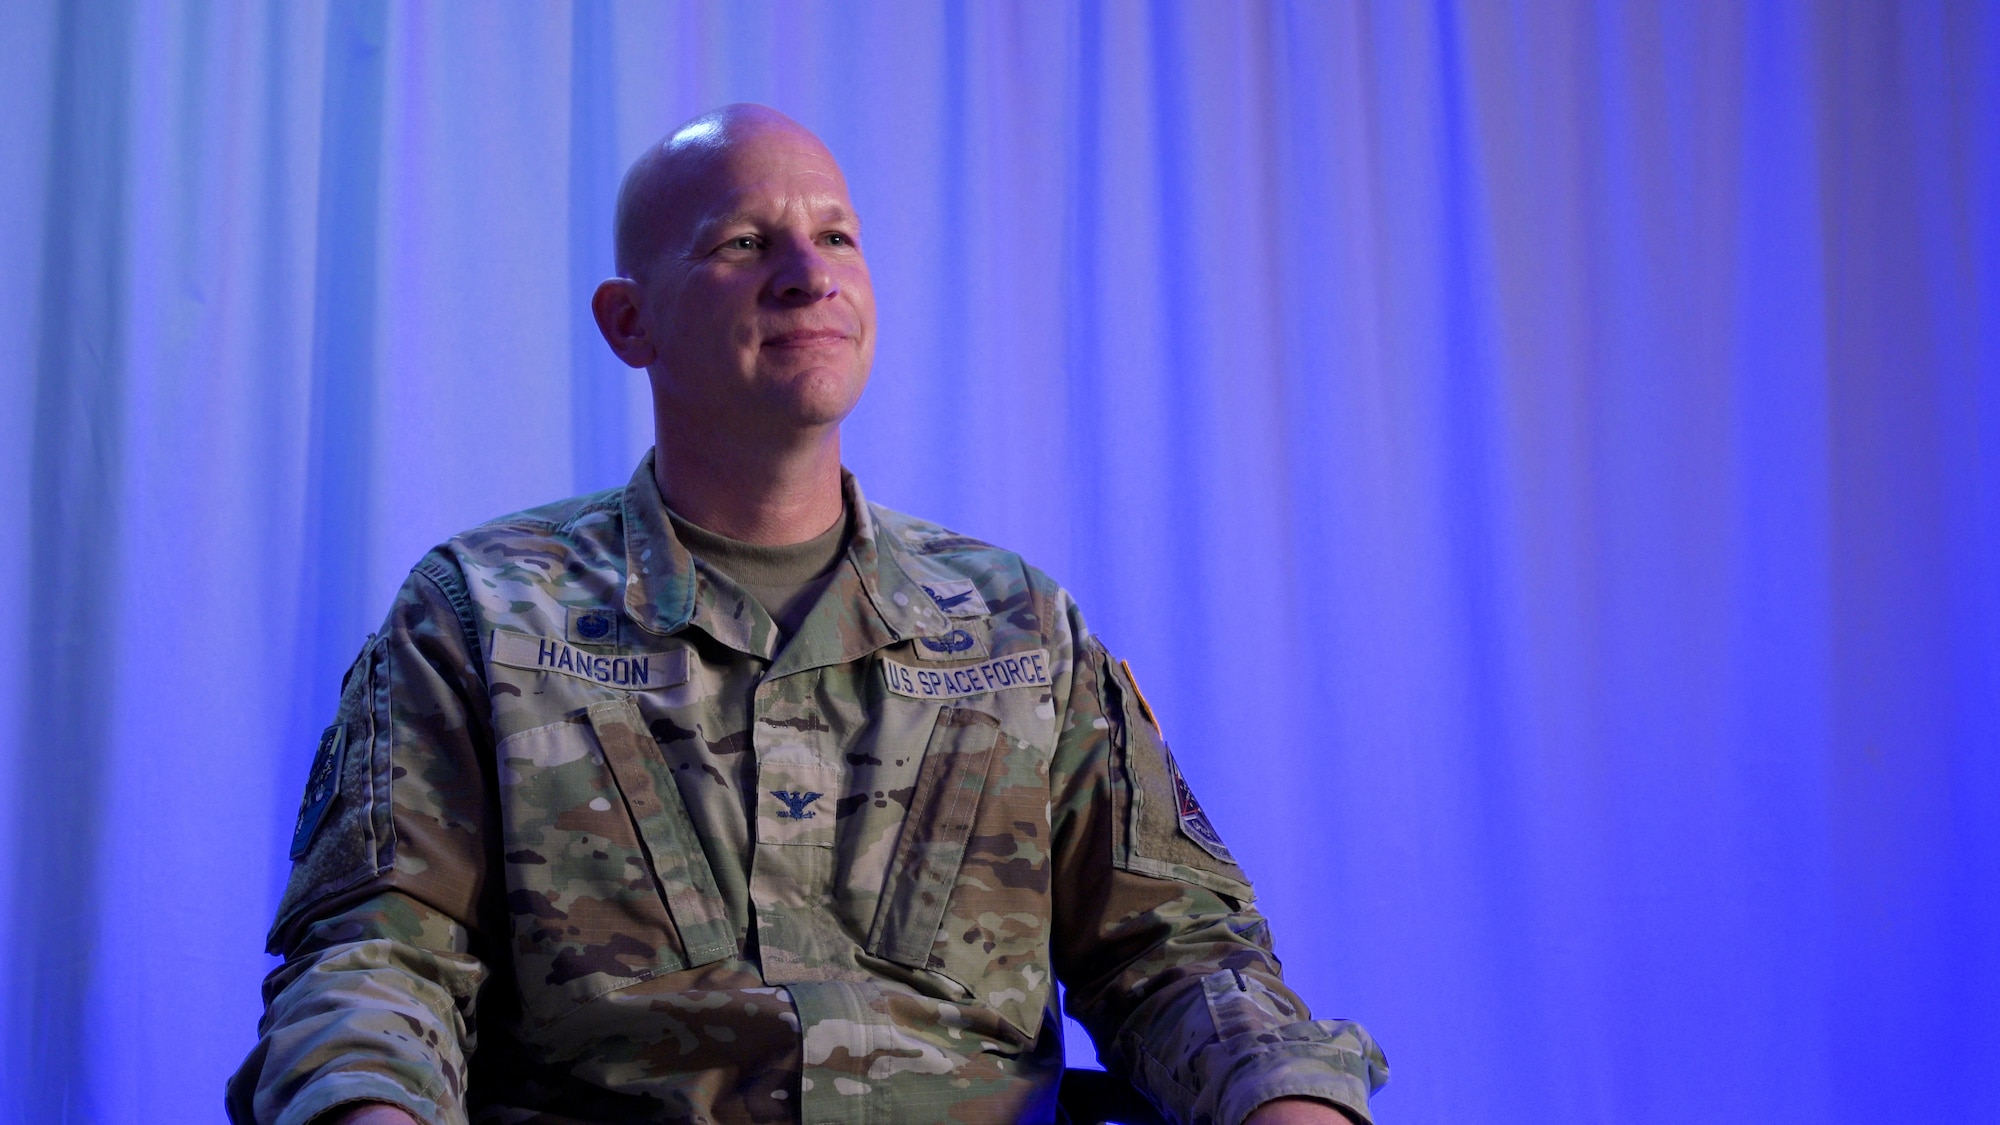 U.S. Space Force Col. David Hanson, Space Base Delta 1 commander, sits for an interview at Peterson Space Force Base.